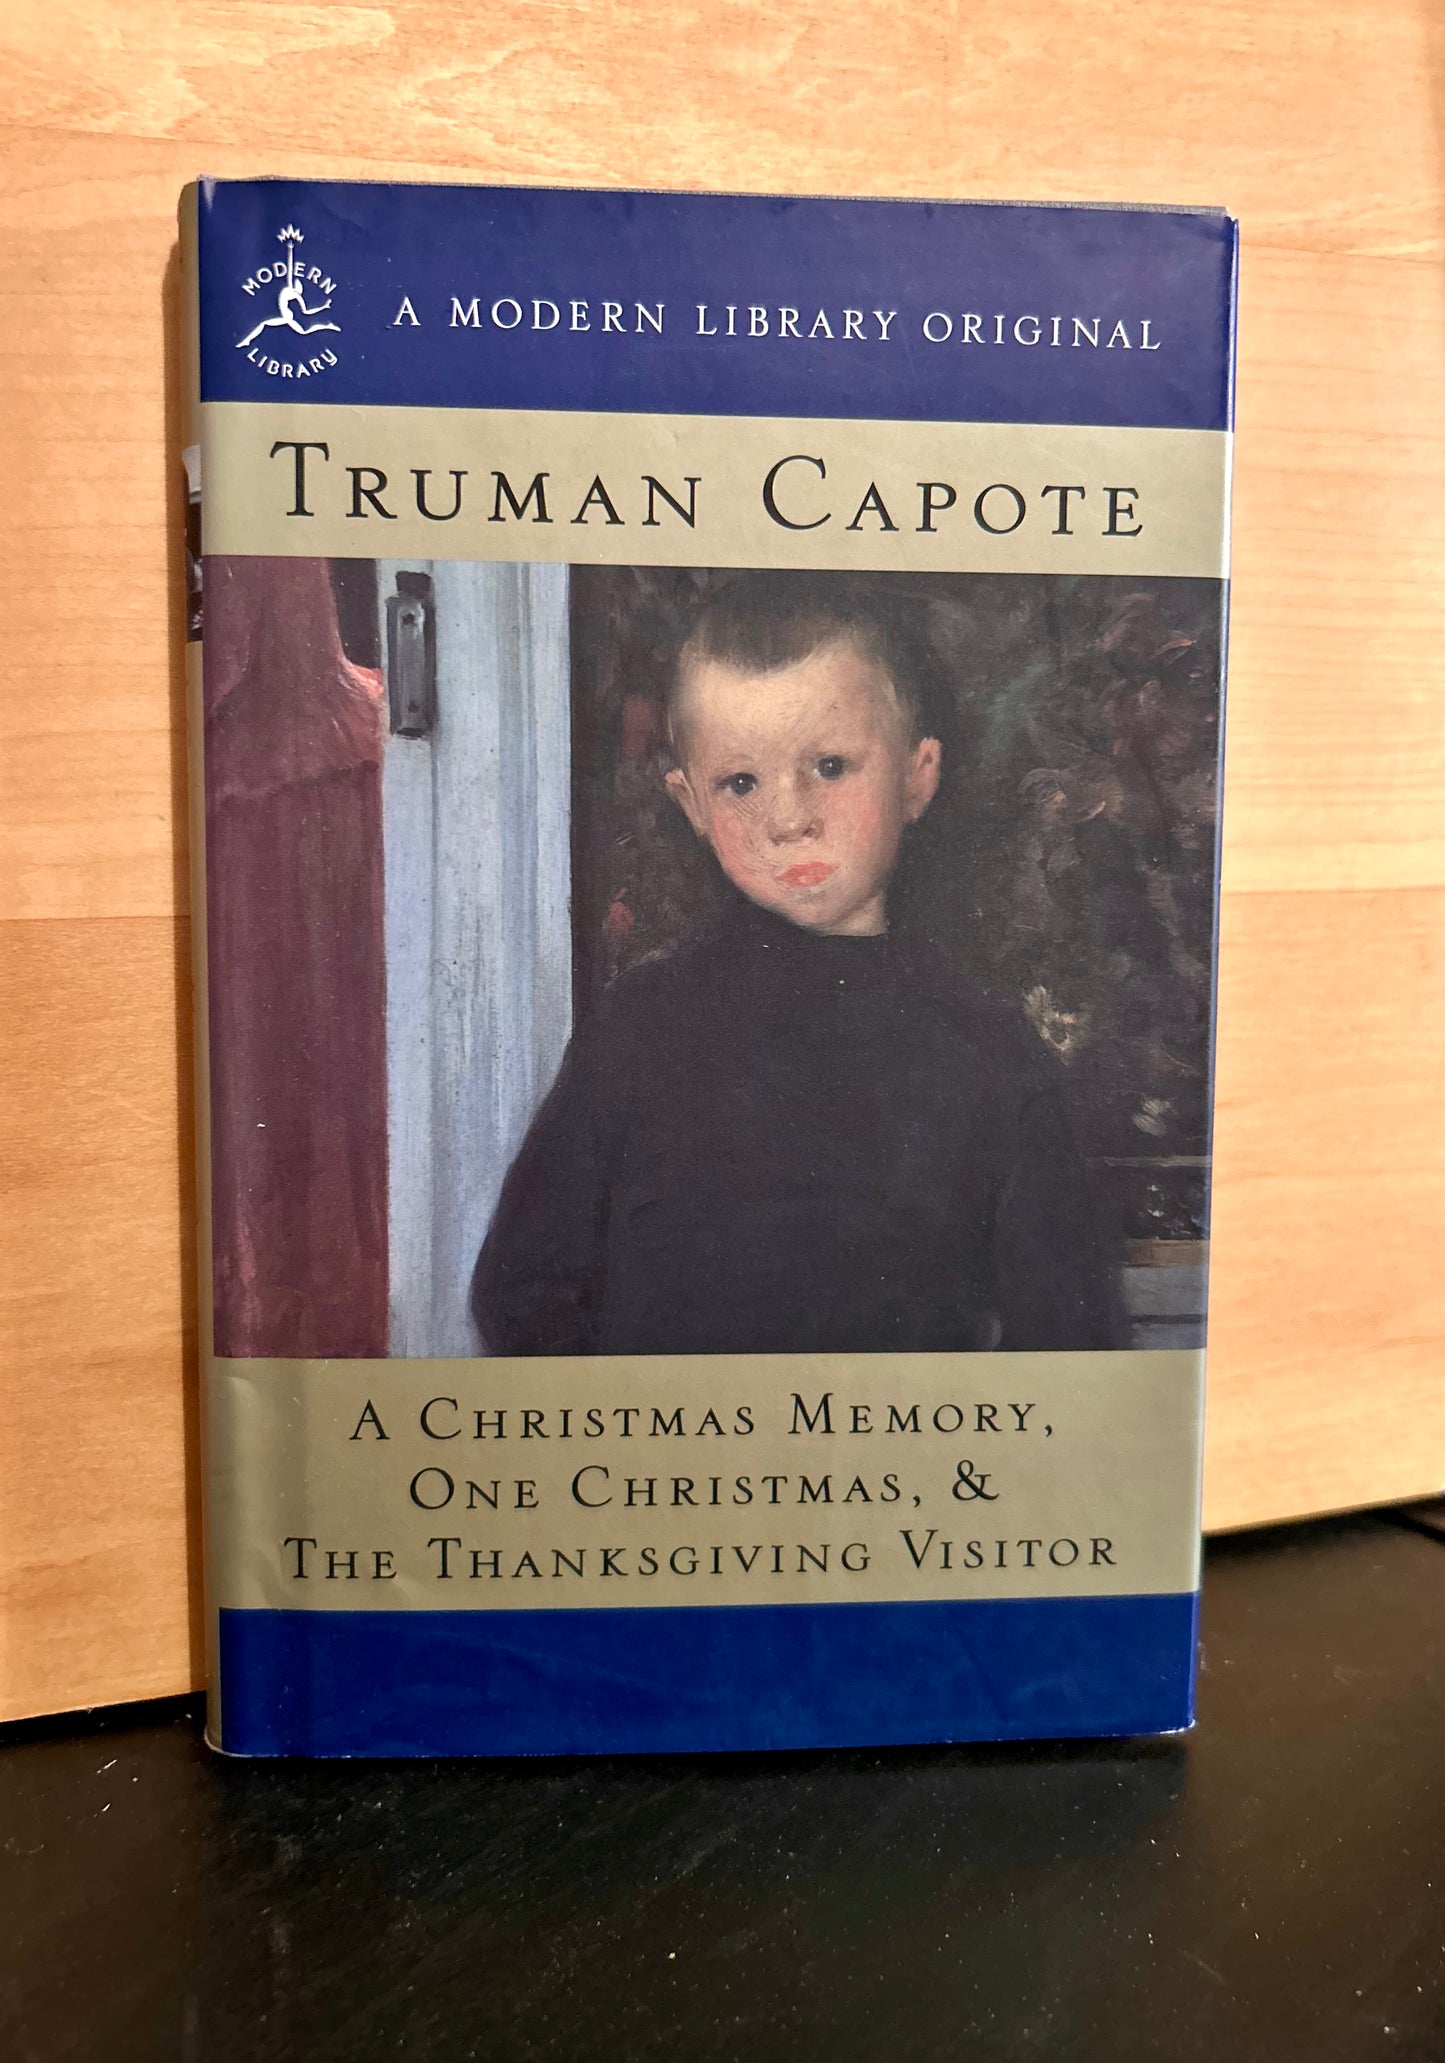 Truman Capote - Holiday stories collection